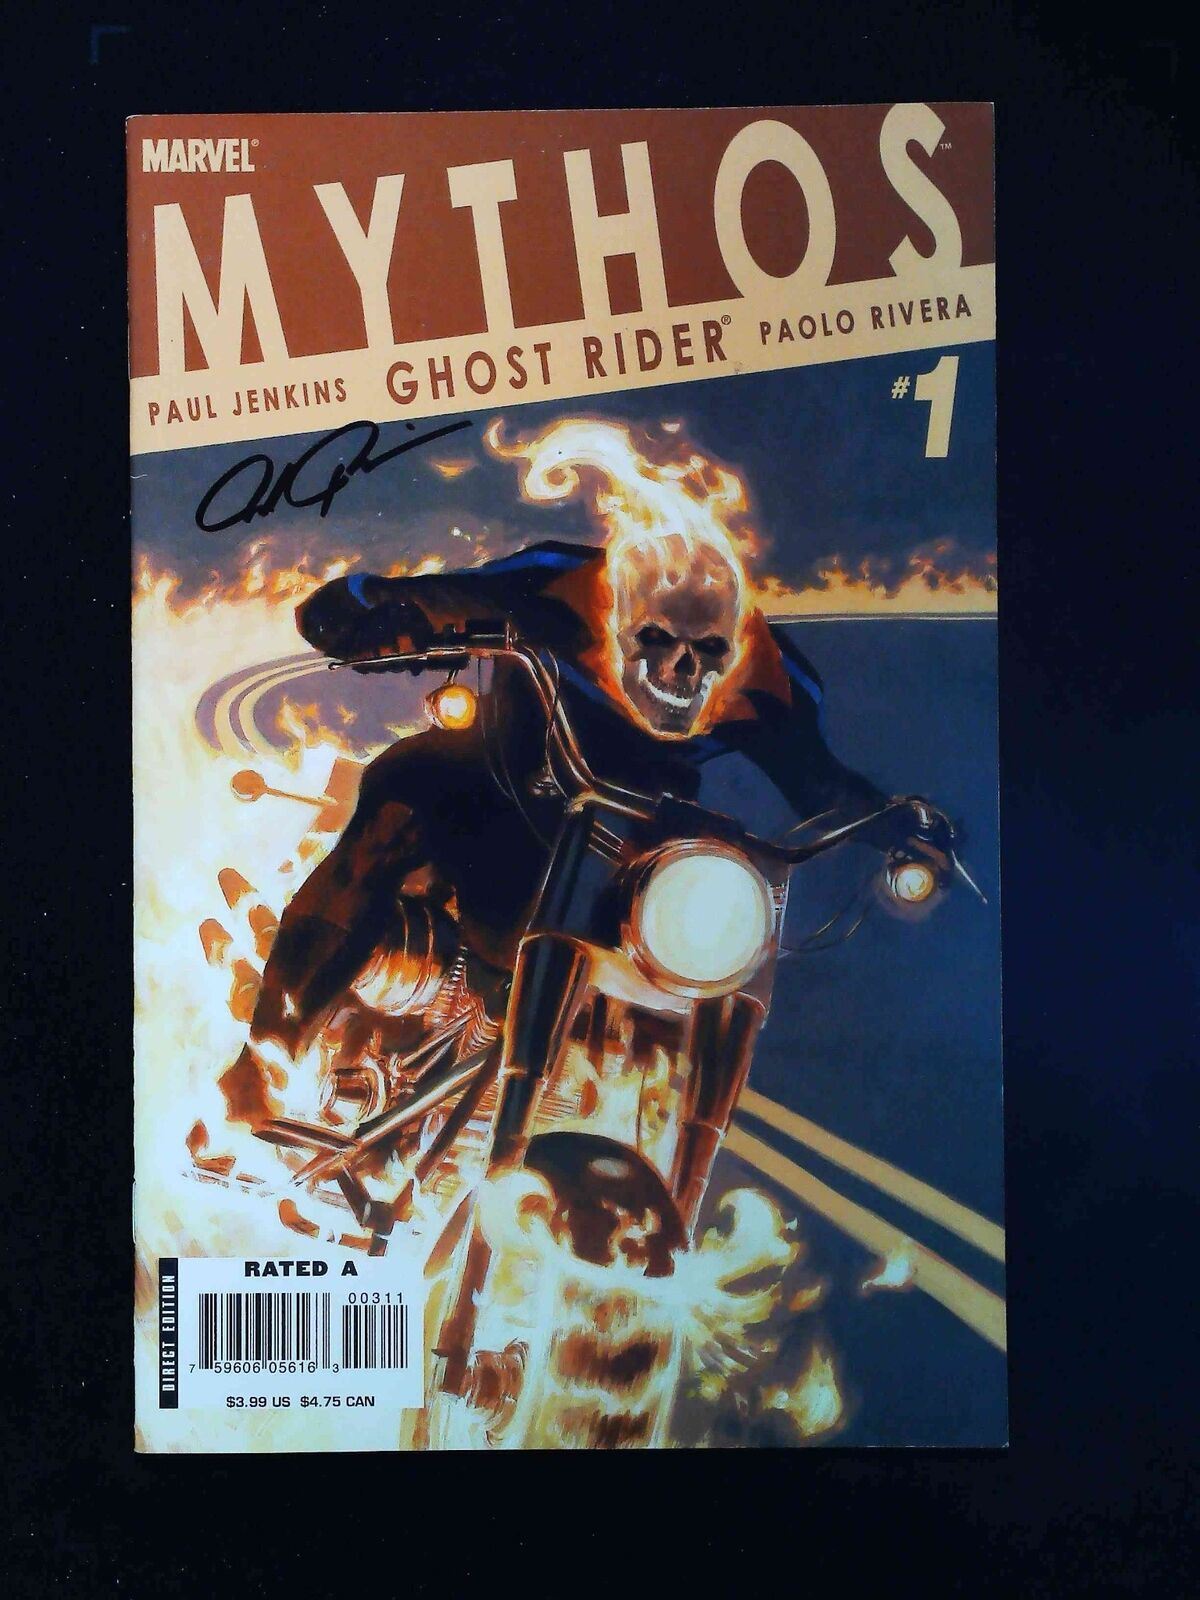 Mythos Ghost Rider #1  Marvel Comics 2007  Vf+  Signed By Paolo Rivera